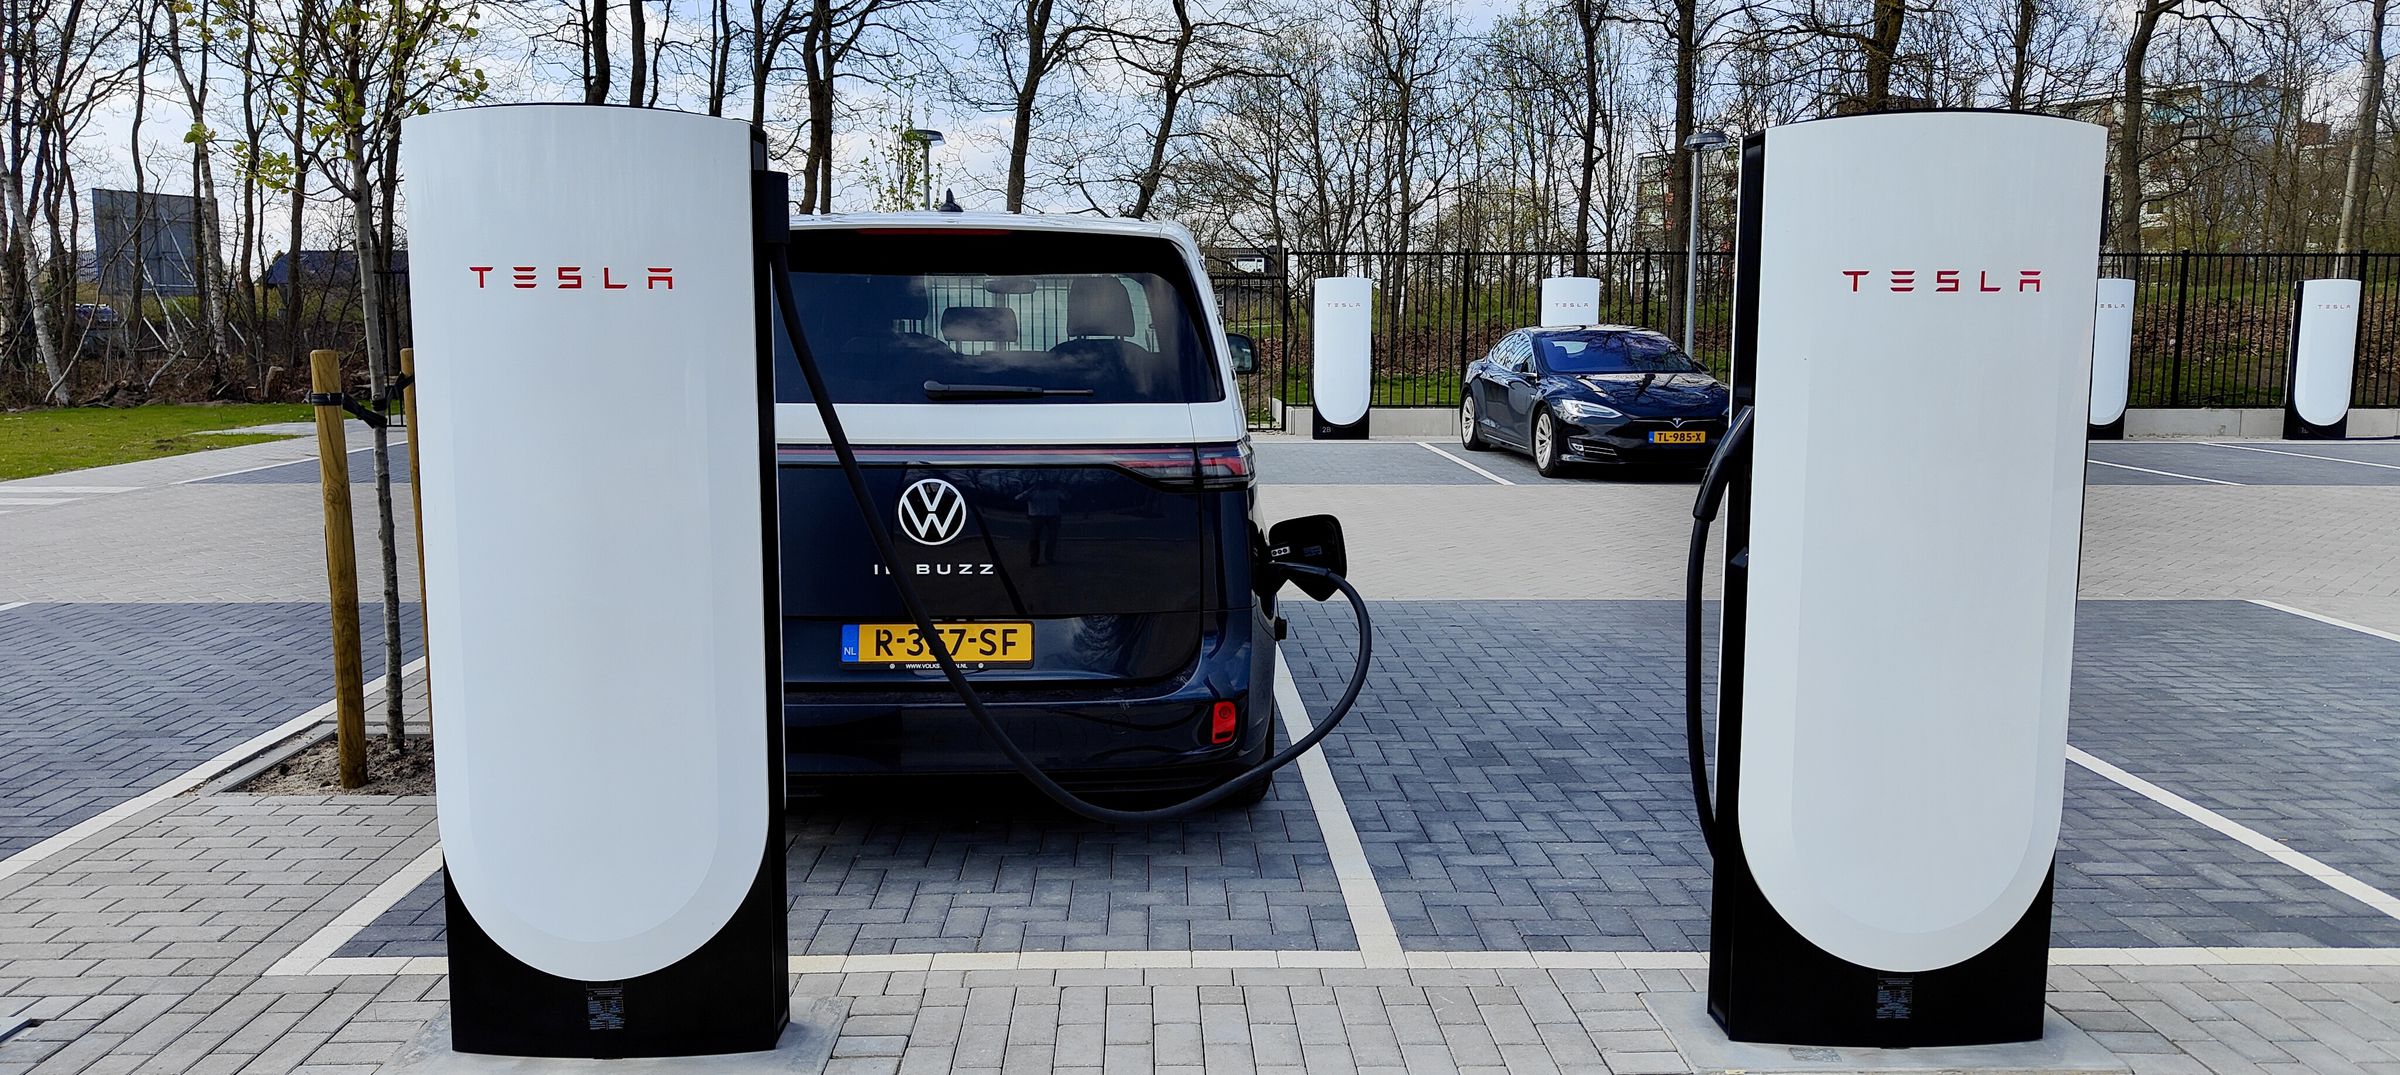 Yes, Tesla’s chargers, like this V4 Supercharger in the Netherlands, are generally open to all comers in Europe, no adapter needed since even Teslas come standard with CCS charging ports.